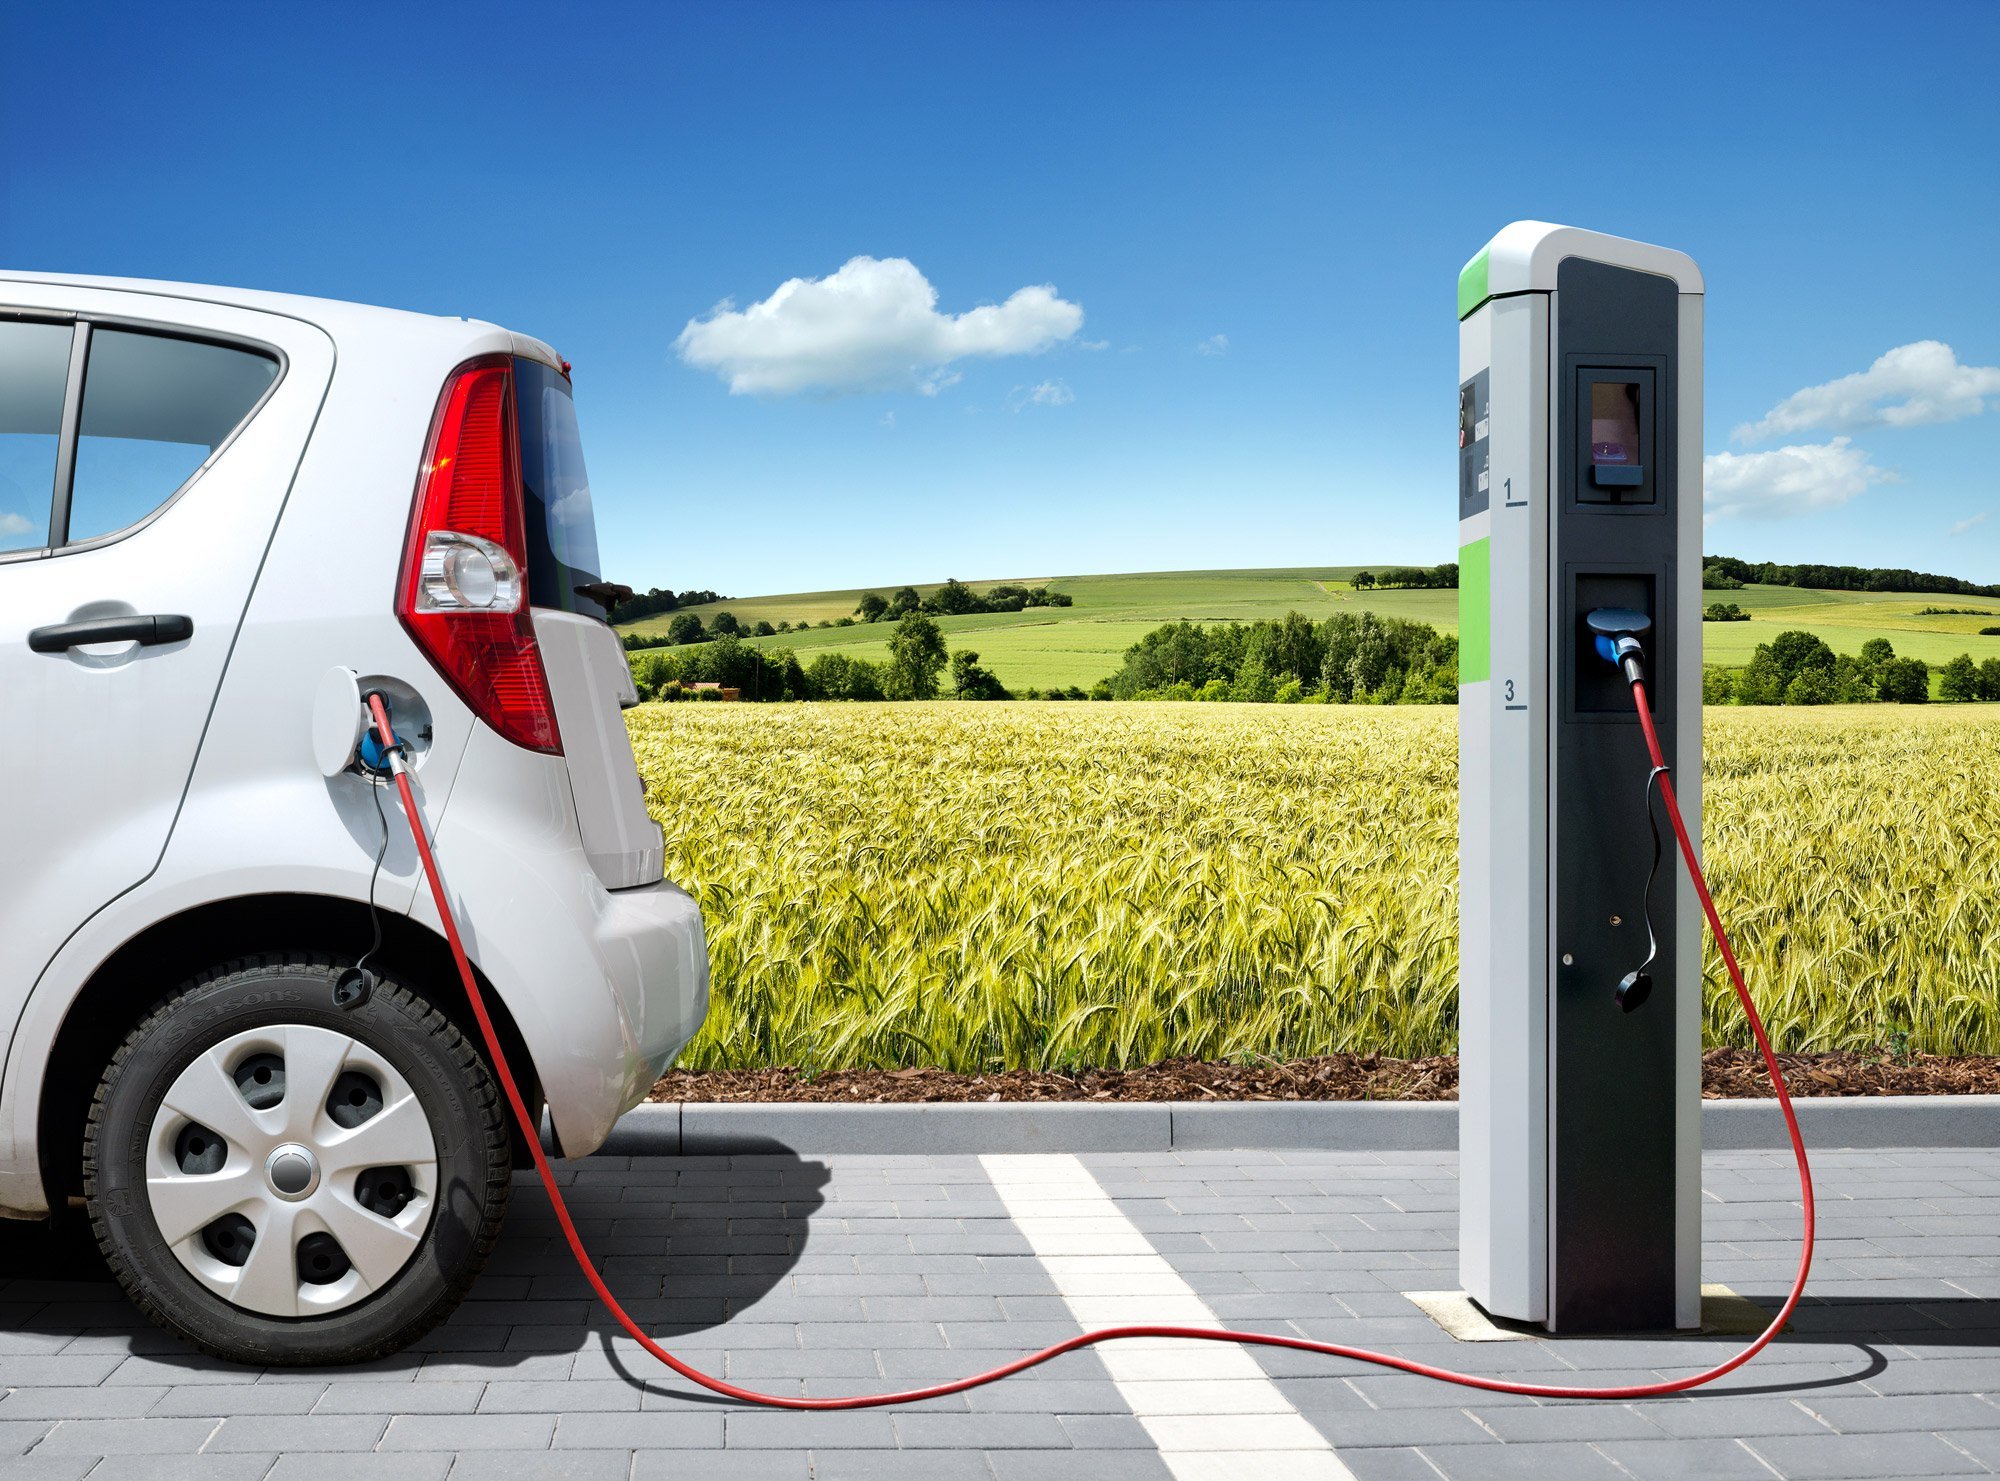 5 Electric Car Facts You Need to Know About Before Purchasing